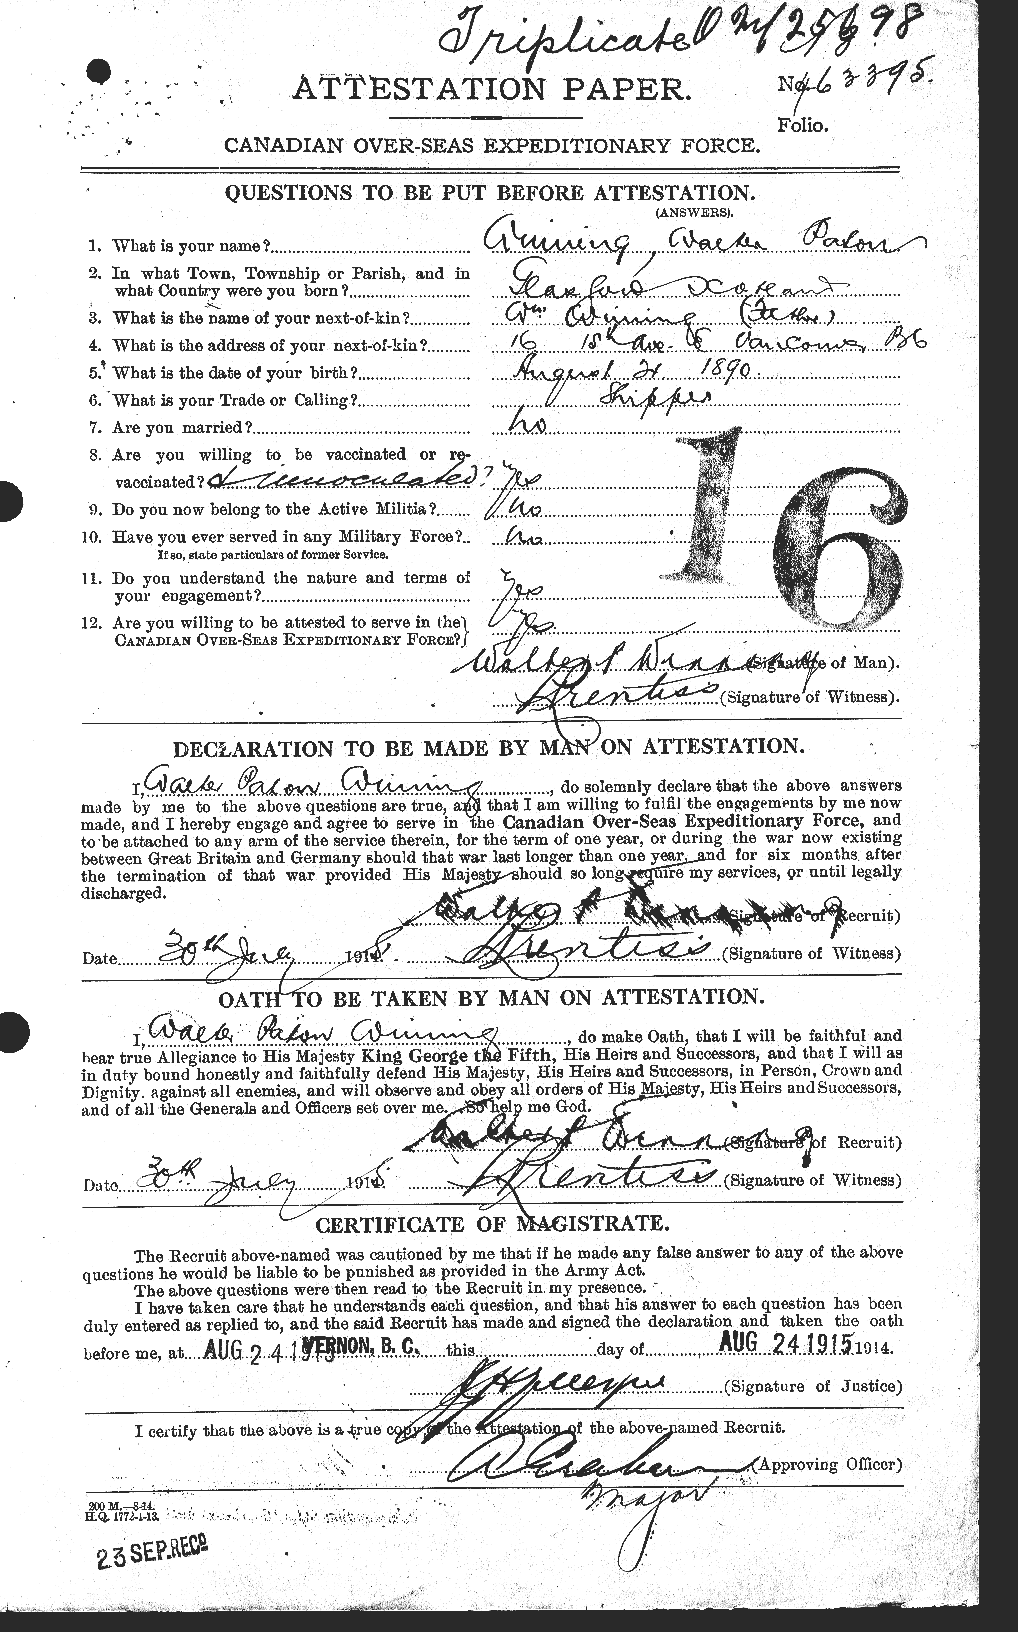 Personnel Records of the First World War - CEF 679143a